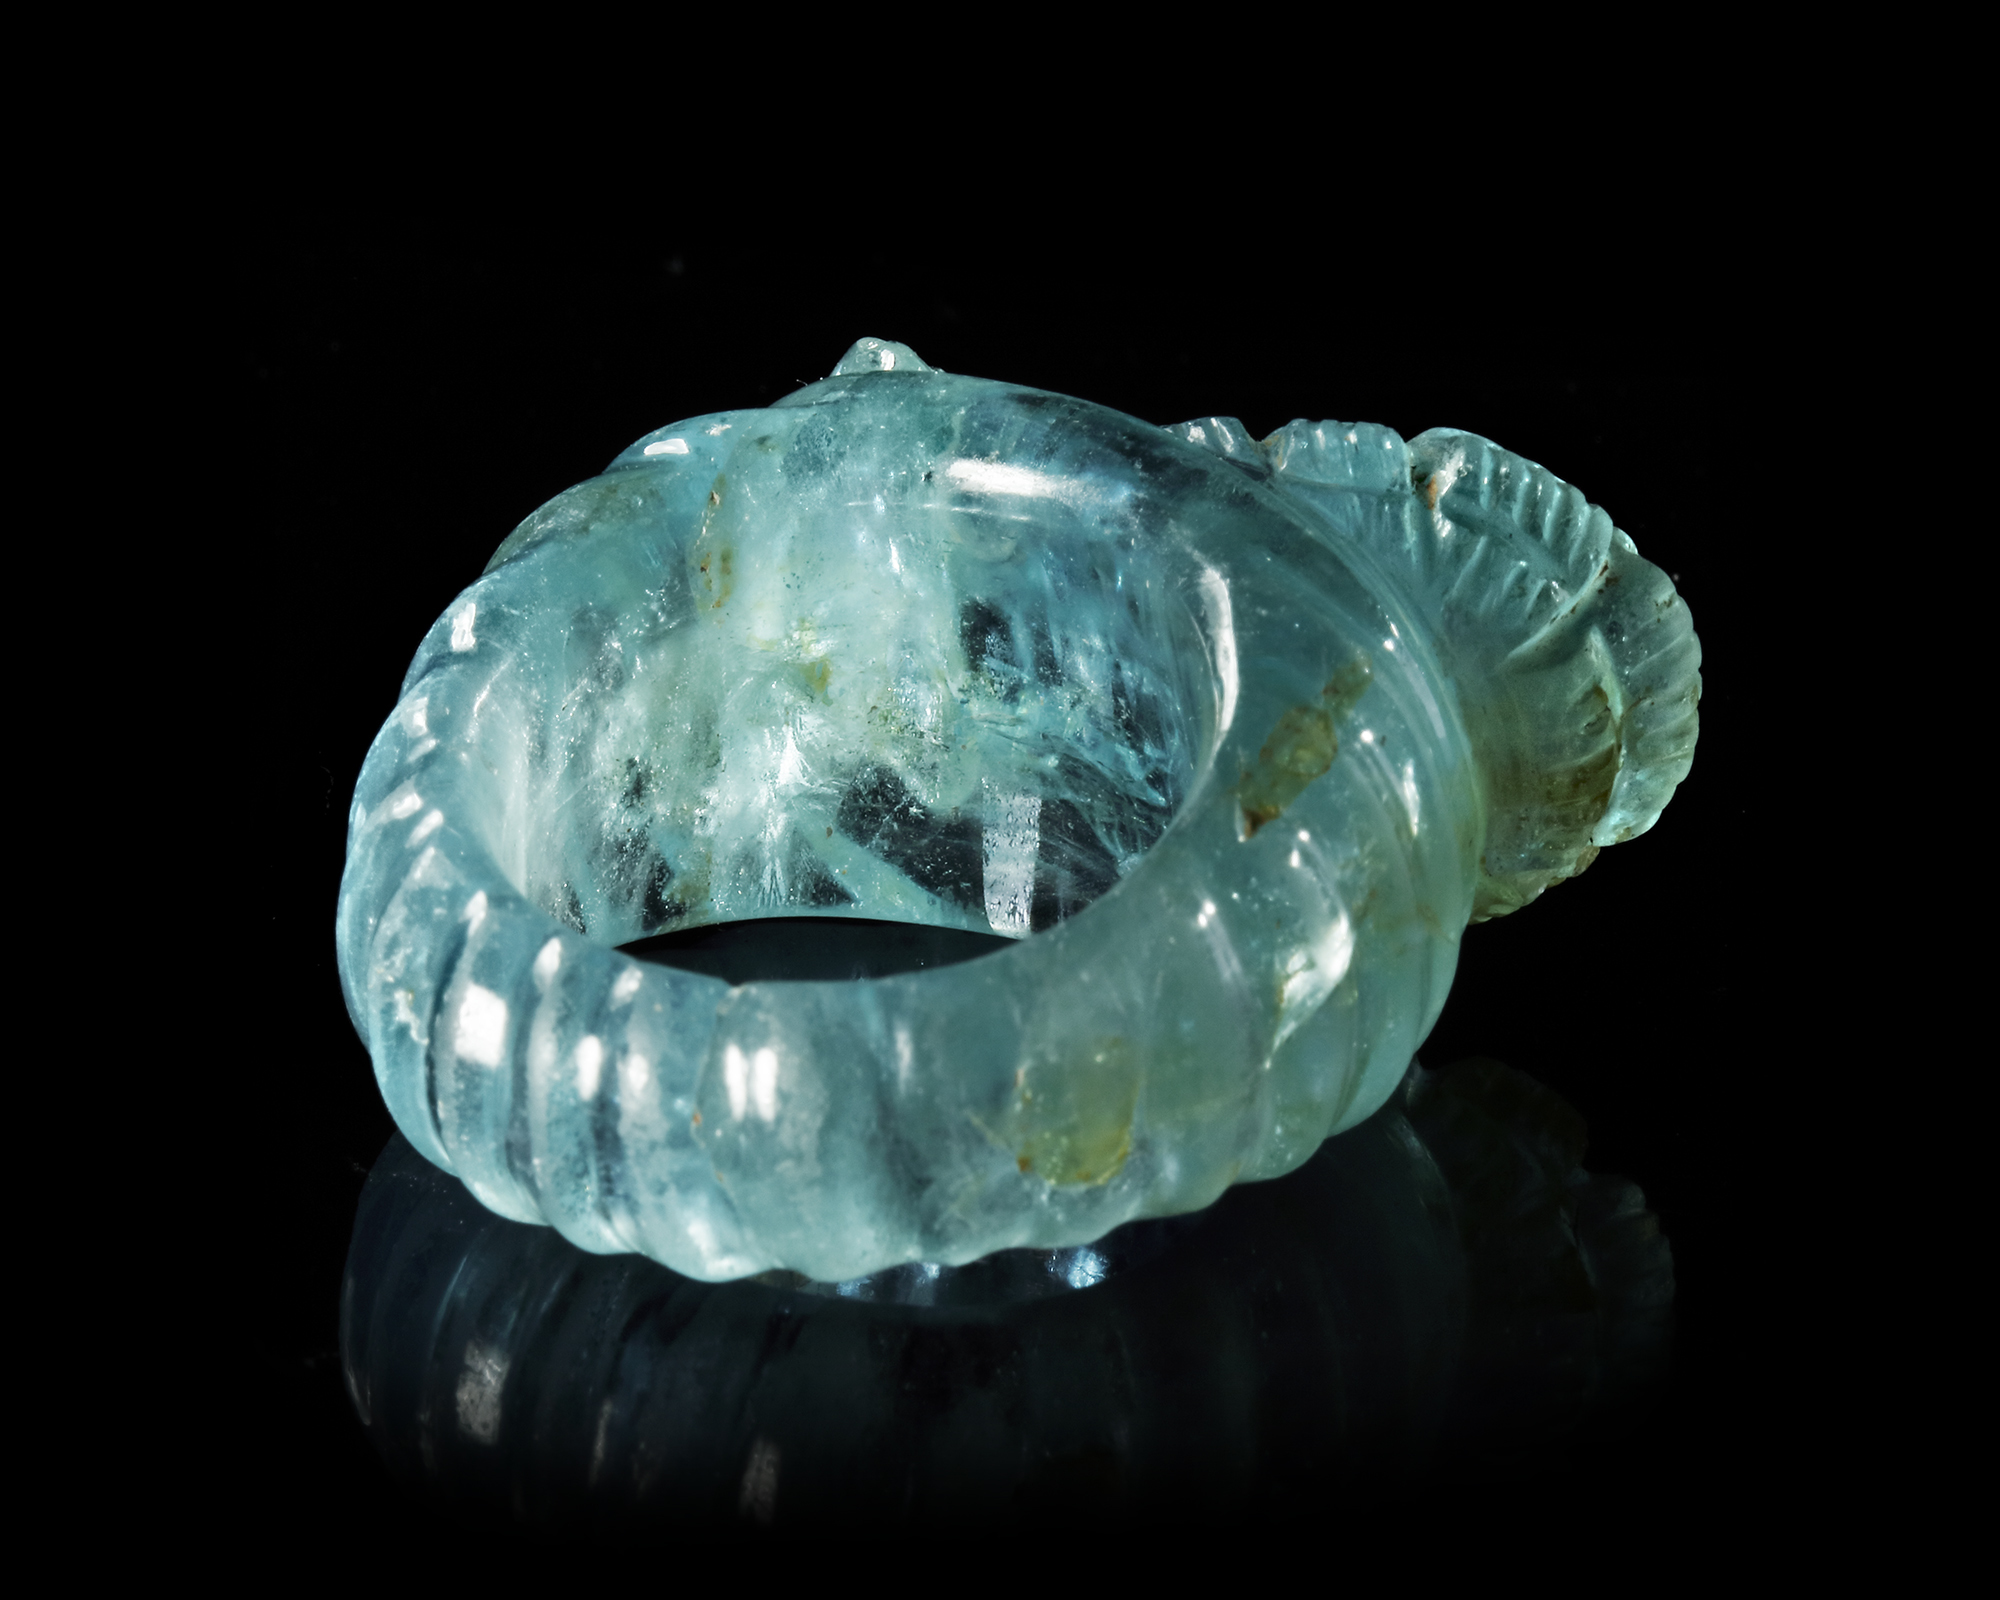 A HIGHLY IMPORTANT ROMAN RING IN AQUAMARINE, 2ND CENTURY AD OR LATER - Image 4 of 4